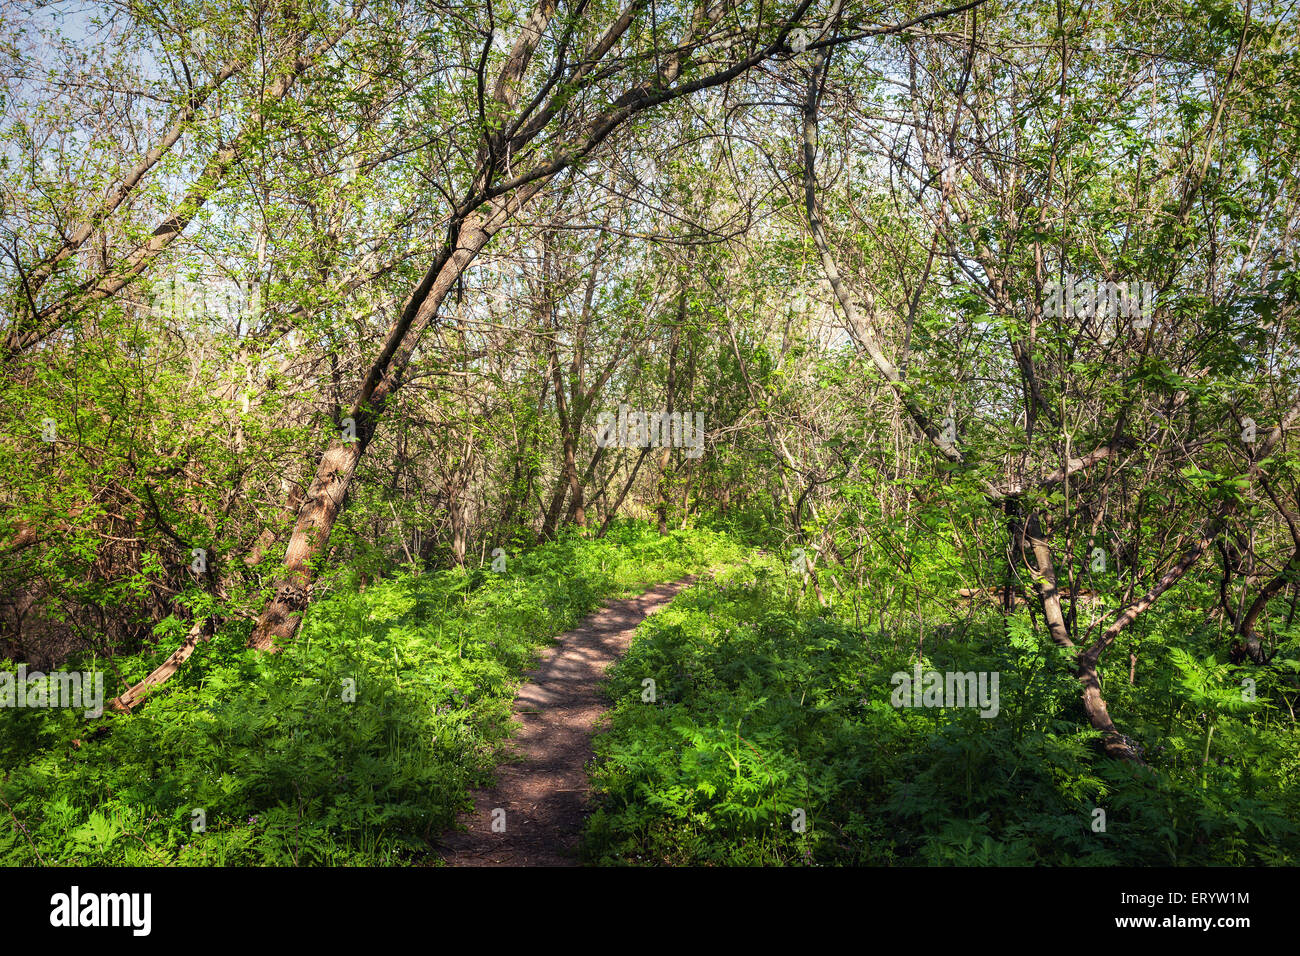 Spring sunset in beautiful magic forest with green plants, trees and trail. Landscape Stock Photo